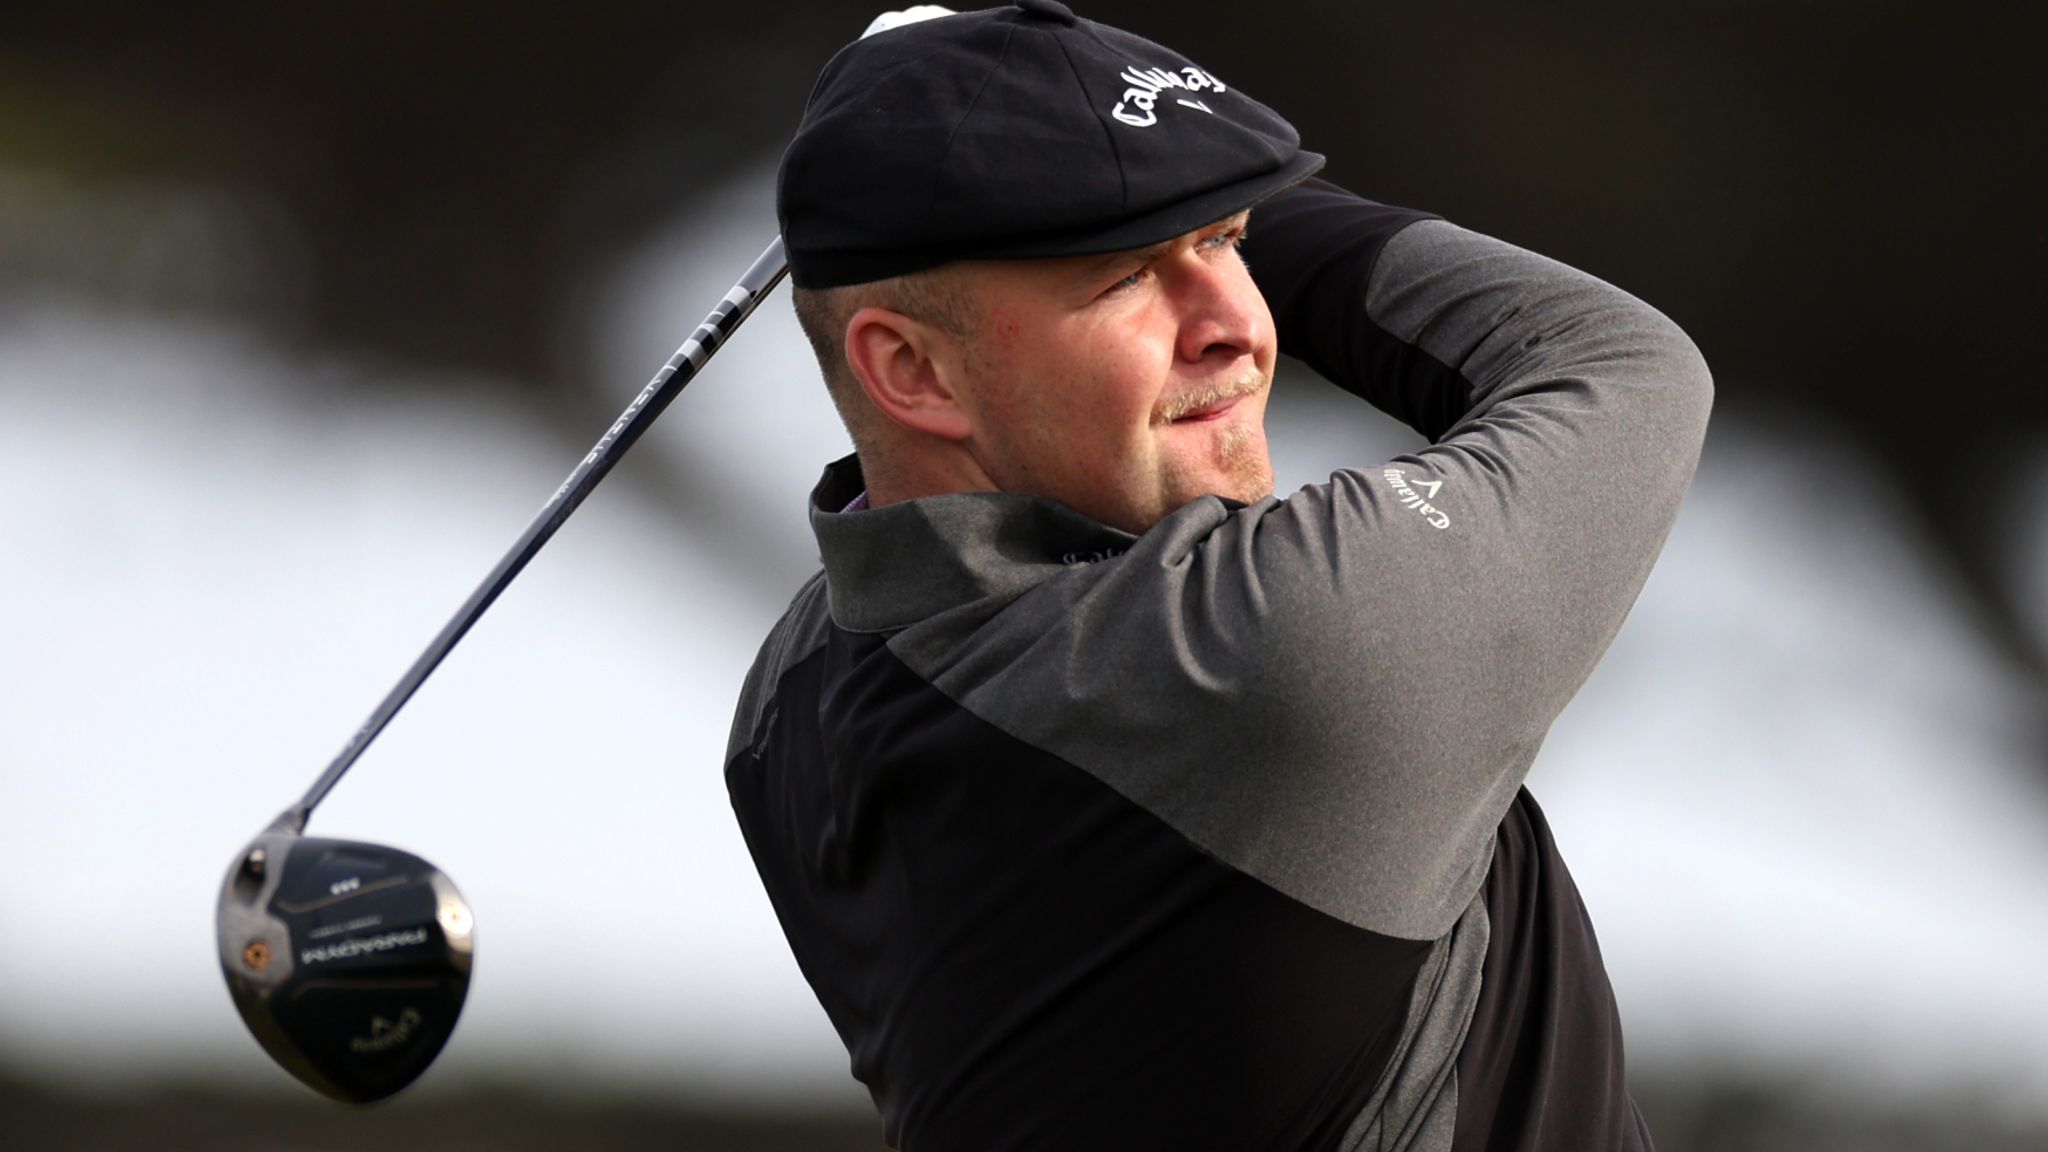 ATandT Pebble Beach Pro-Am Englands Harry Hall second after opening round as Gareth Bale impresses Golf News Sky Sports